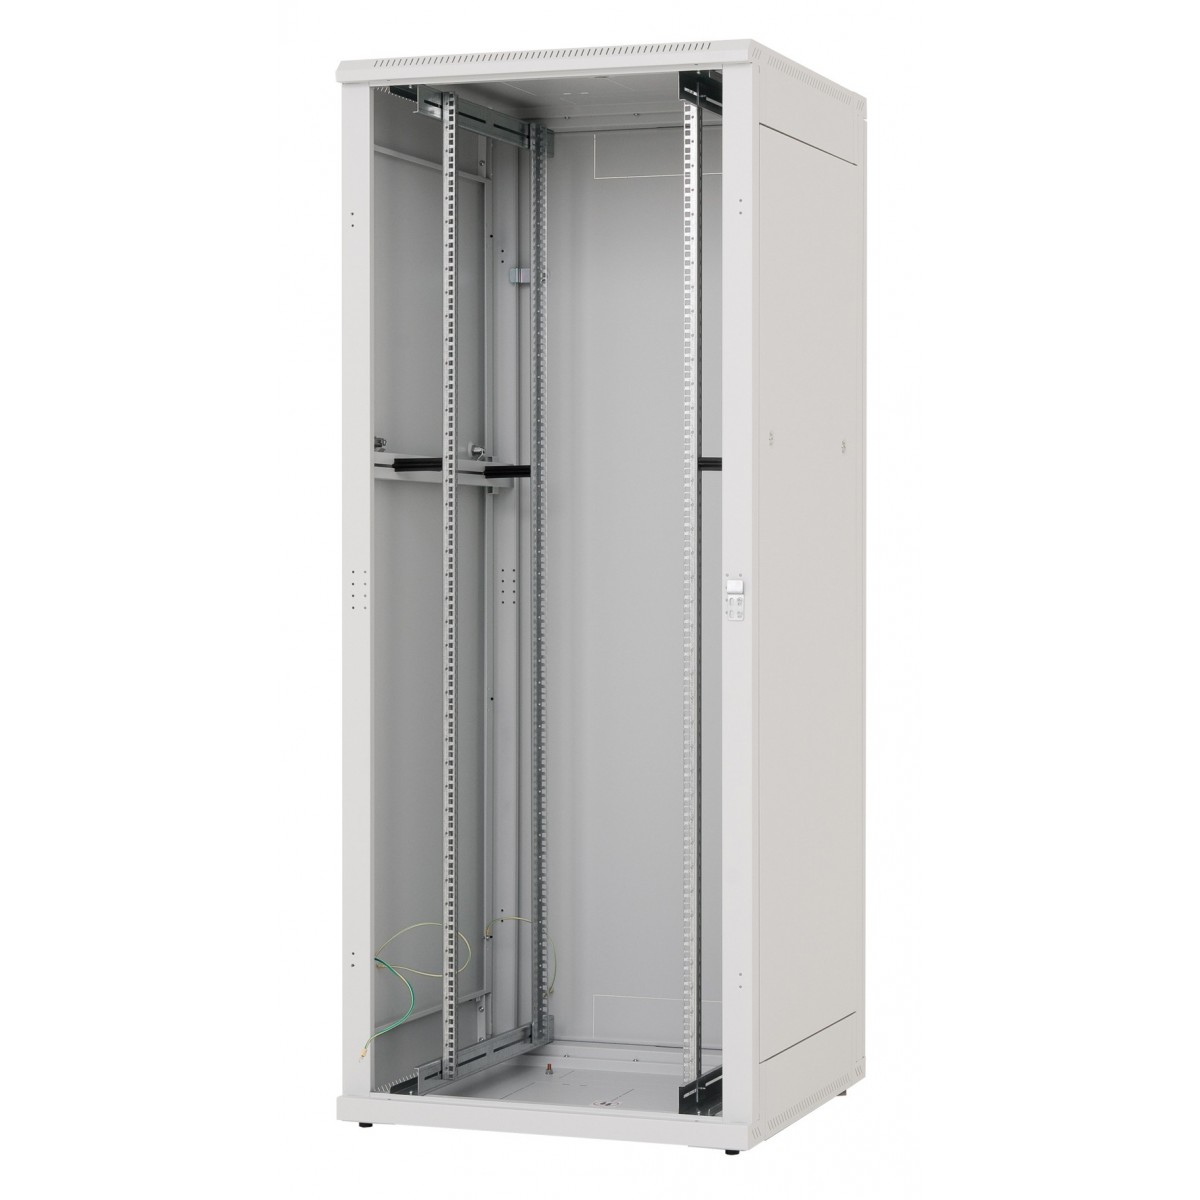 TRITON Free-standing cabinet RZA 800x1000 left perforated door - Freestanding rack - 400 kg - Gray - Stainless steel - 800 mm - 